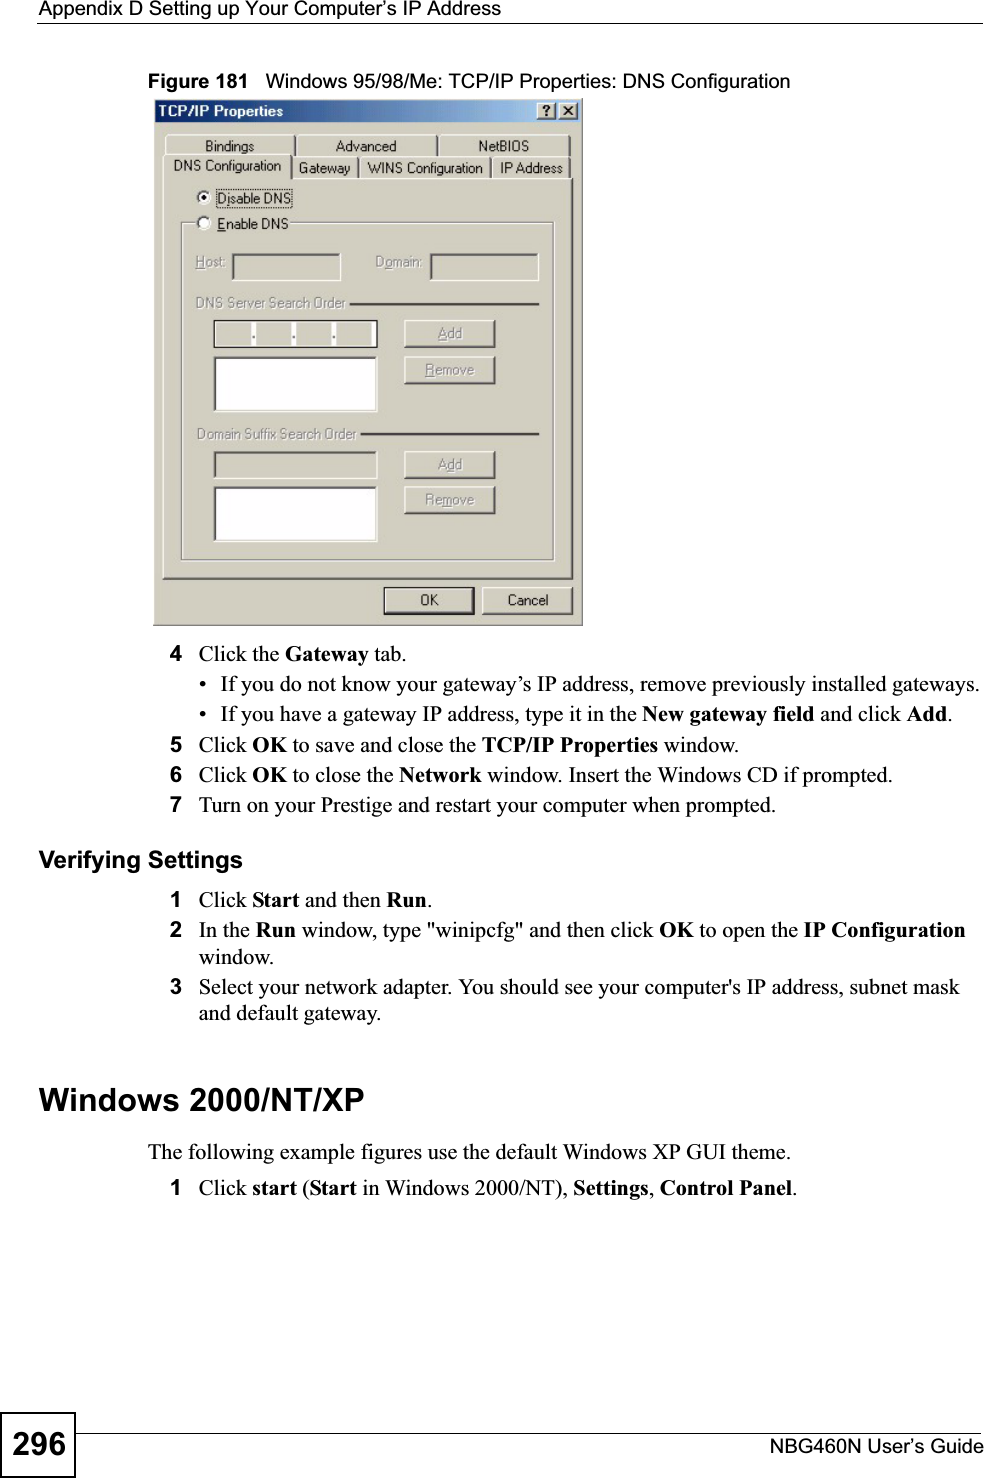 Appendix D Setting up Your Computer’s IP AddressNBG460N User’s Guide296Figure 181   Windows 95/98/Me: TCP/IP Properties: DNS Configuration4Click the Gateway tab.• If you do not know your gateway’s IP address, remove previously installed gateways.• If you have a gateway IP address, type it in the New gateway field and click Add.5Click OK to save and close the TCP/IP Properties window.6Click OK to close the Network window. Insert the Windows CD if prompted.7Turn on your Prestige and restart your computer when prompted.Verifying Settings1Click Start and then Run.2In the Run window, type &quot;winipcfg&quot; and then click OK to open the IP Configurationwindow.3Select your network adapter. You should see your computer&apos;s IP address, subnet mask and default gateway.Windows 2000/NT/XPThe following example figures use the default Windows XP GUI theme.1Click start (Start in Windows 2000/NT), Settings,Control Panel.